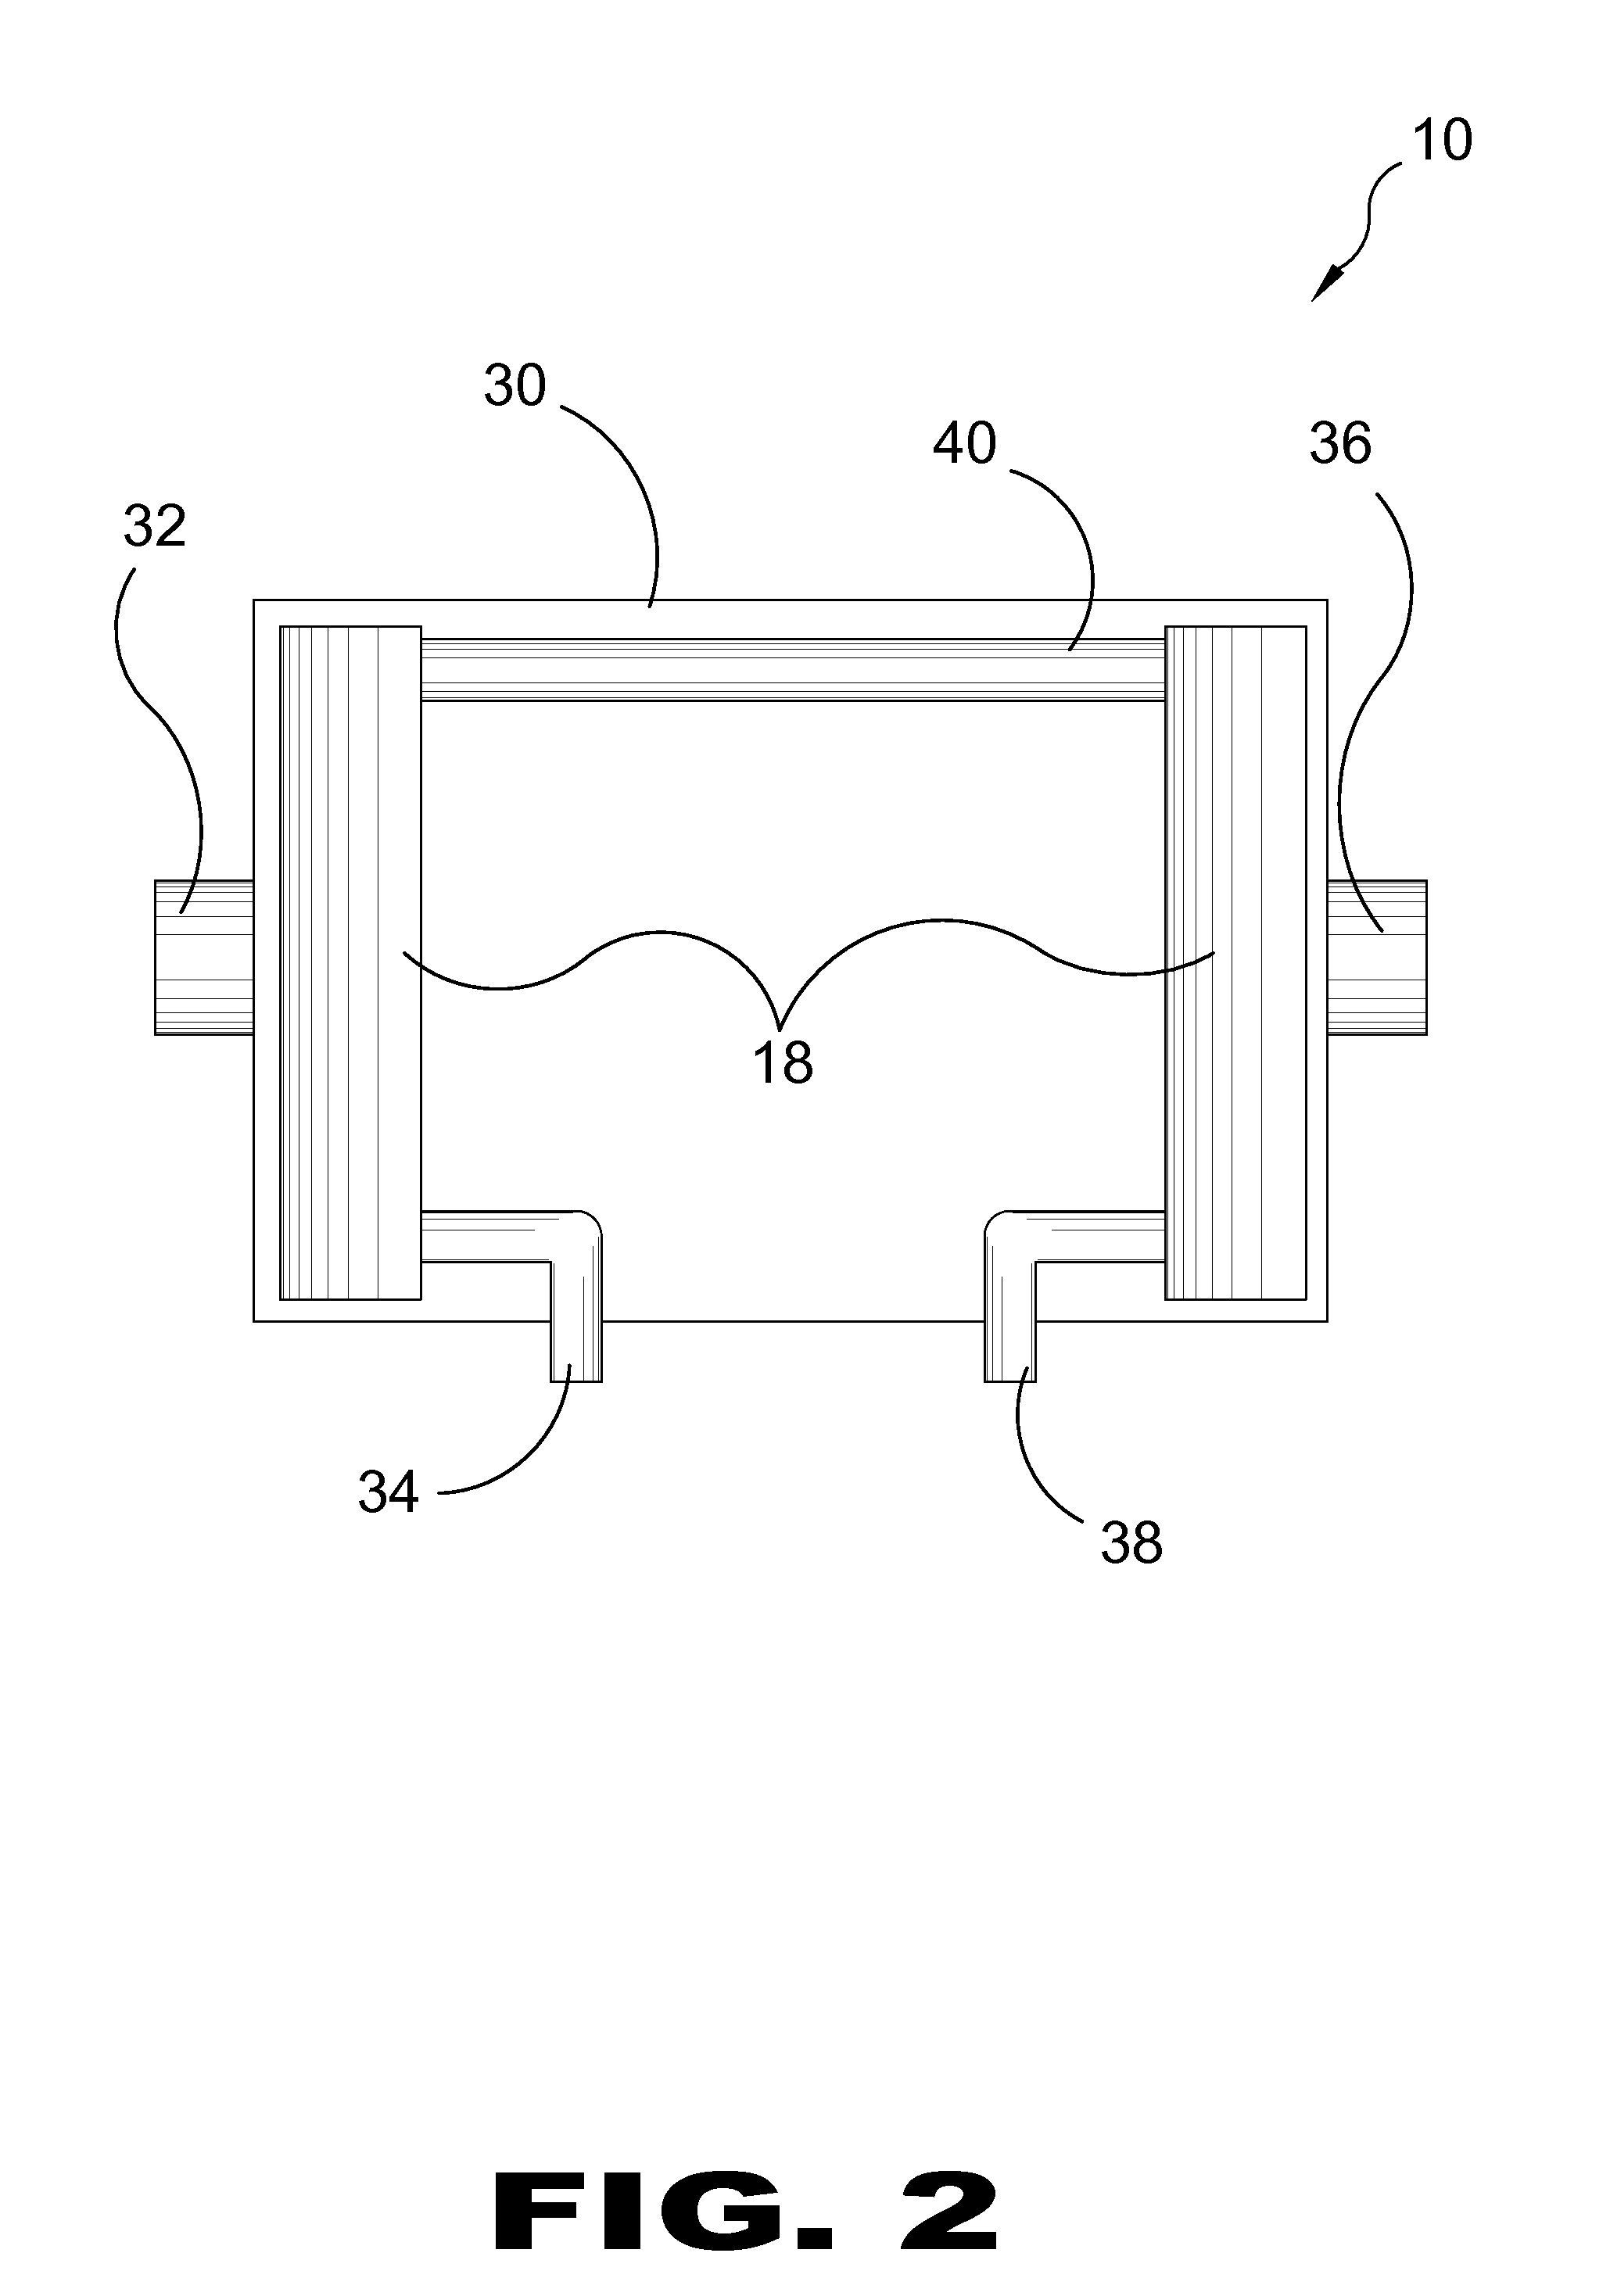 Land Based and Pontoon Based Forced Air Thermal Evaporator